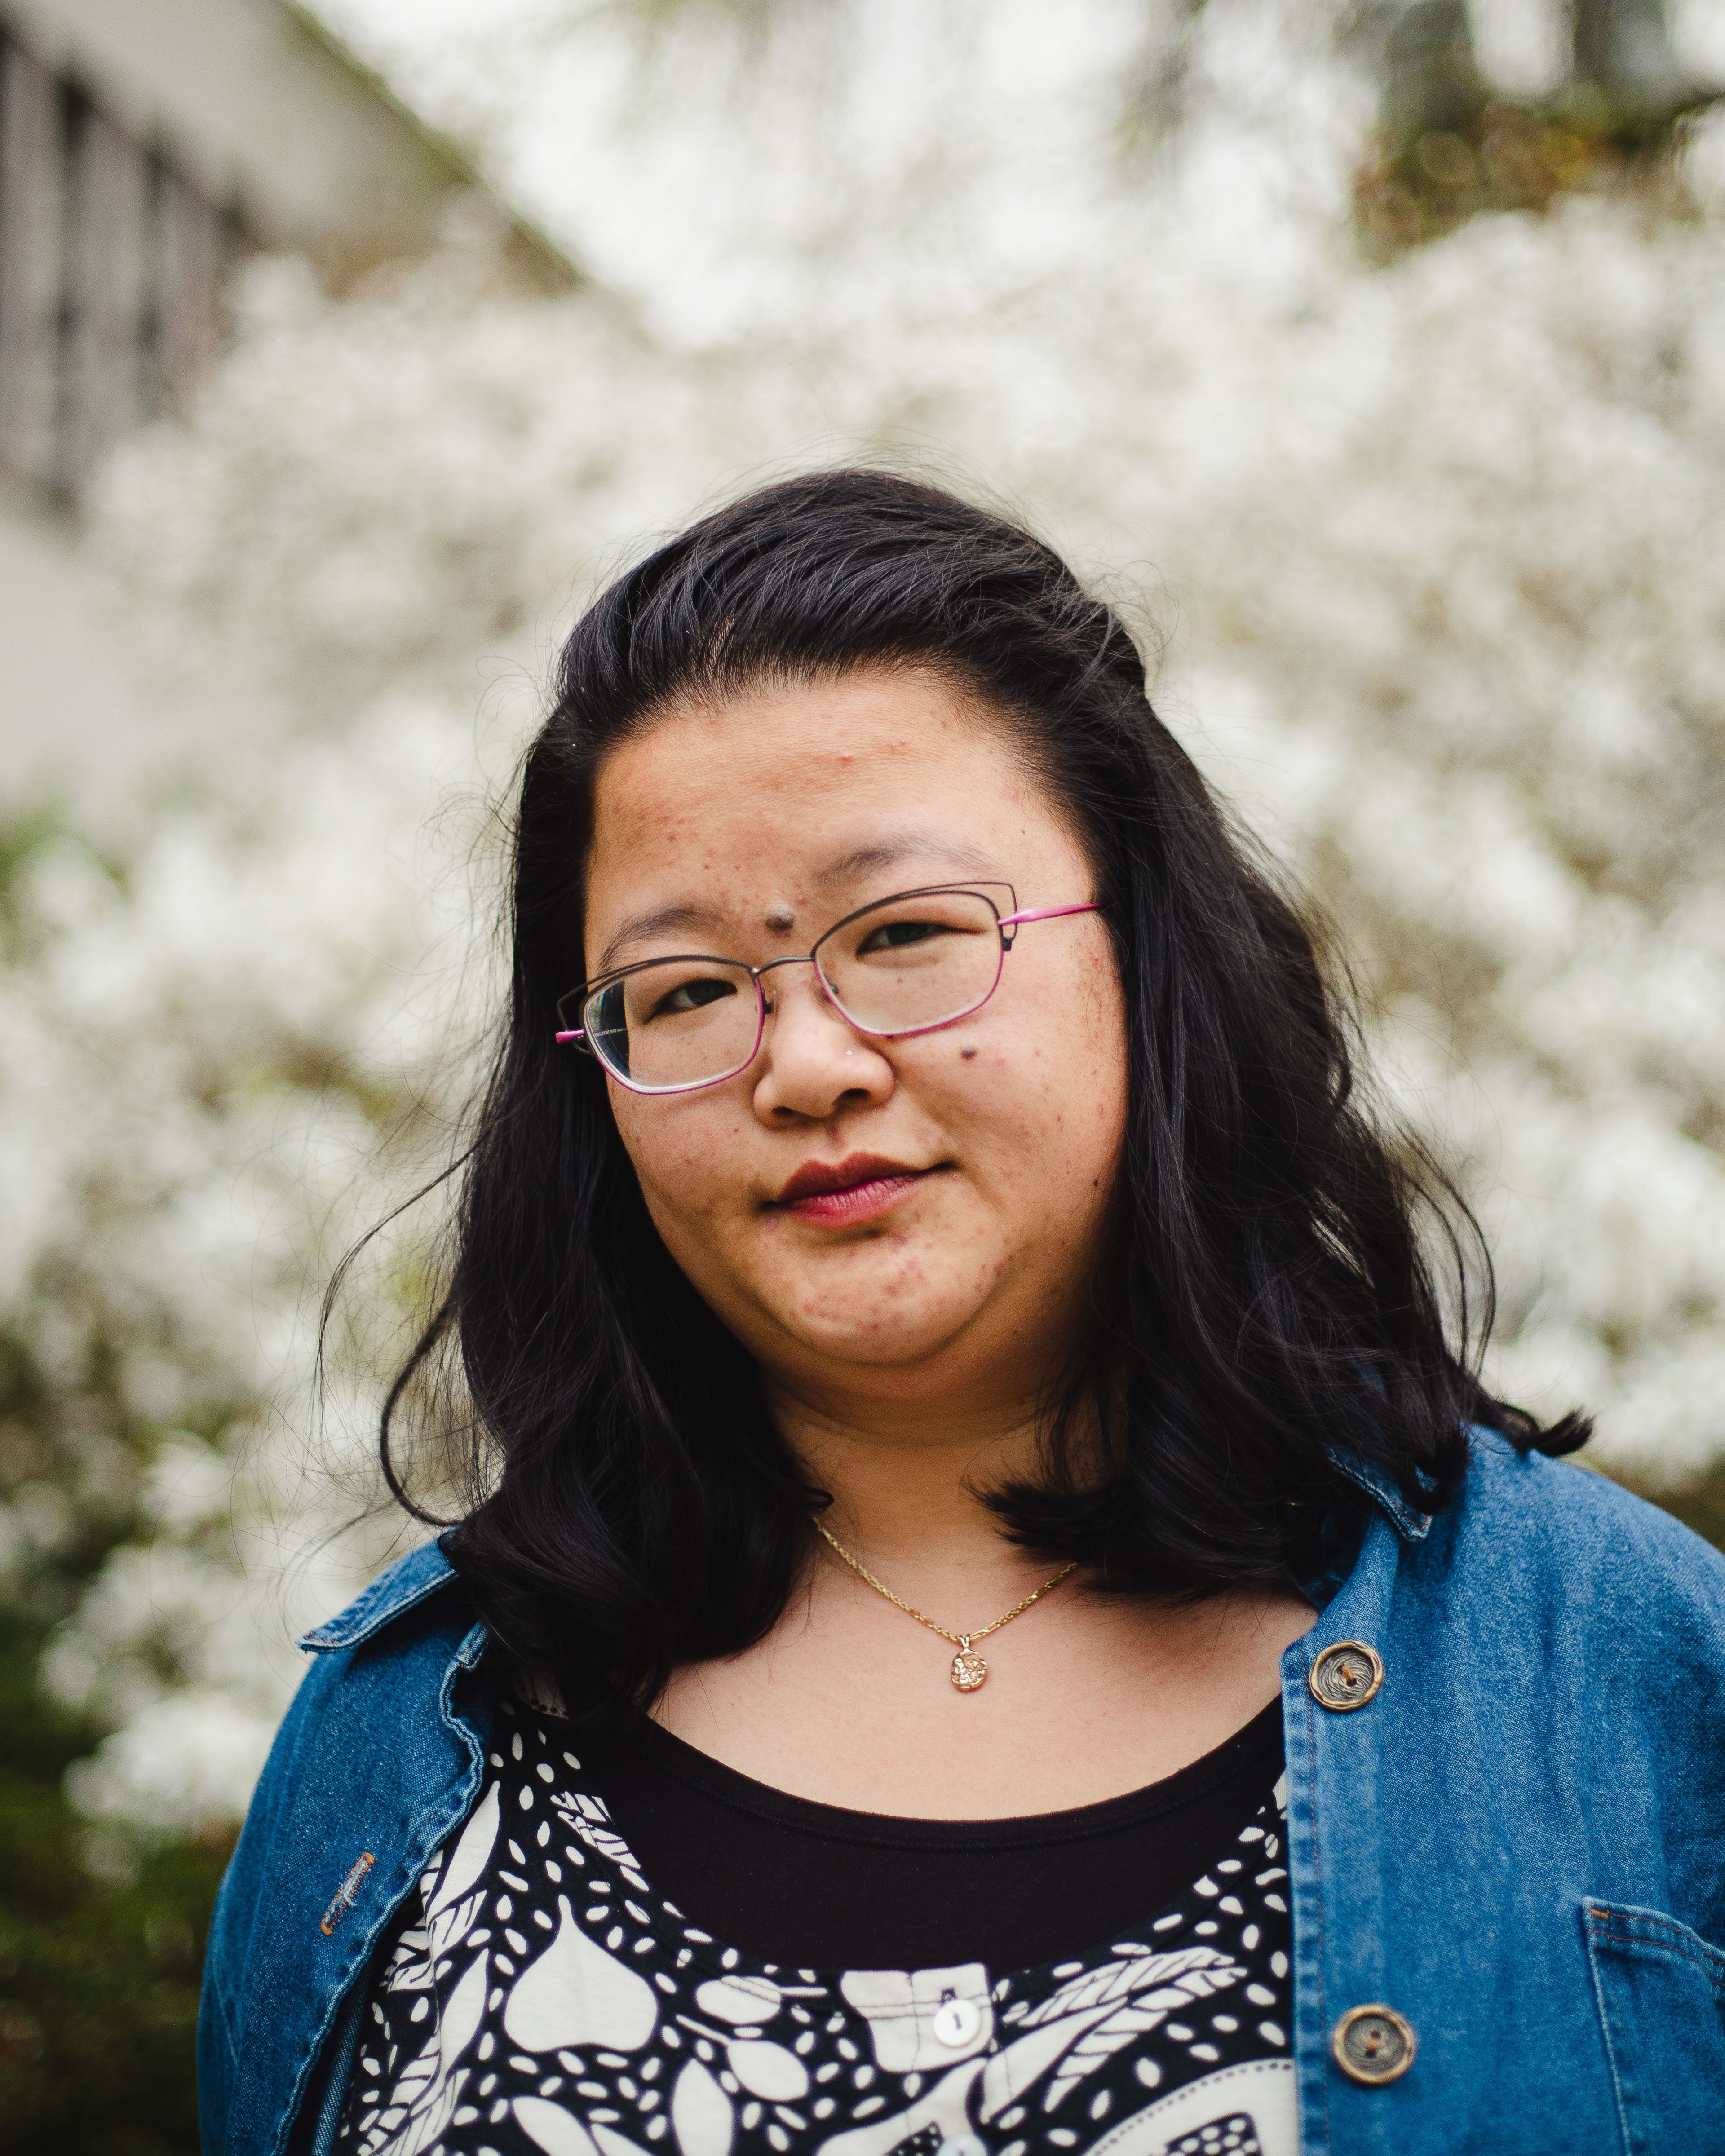 Being an adoptee — specifically an Asian adoptee — “is a lot of being a bridge," says Ballin.